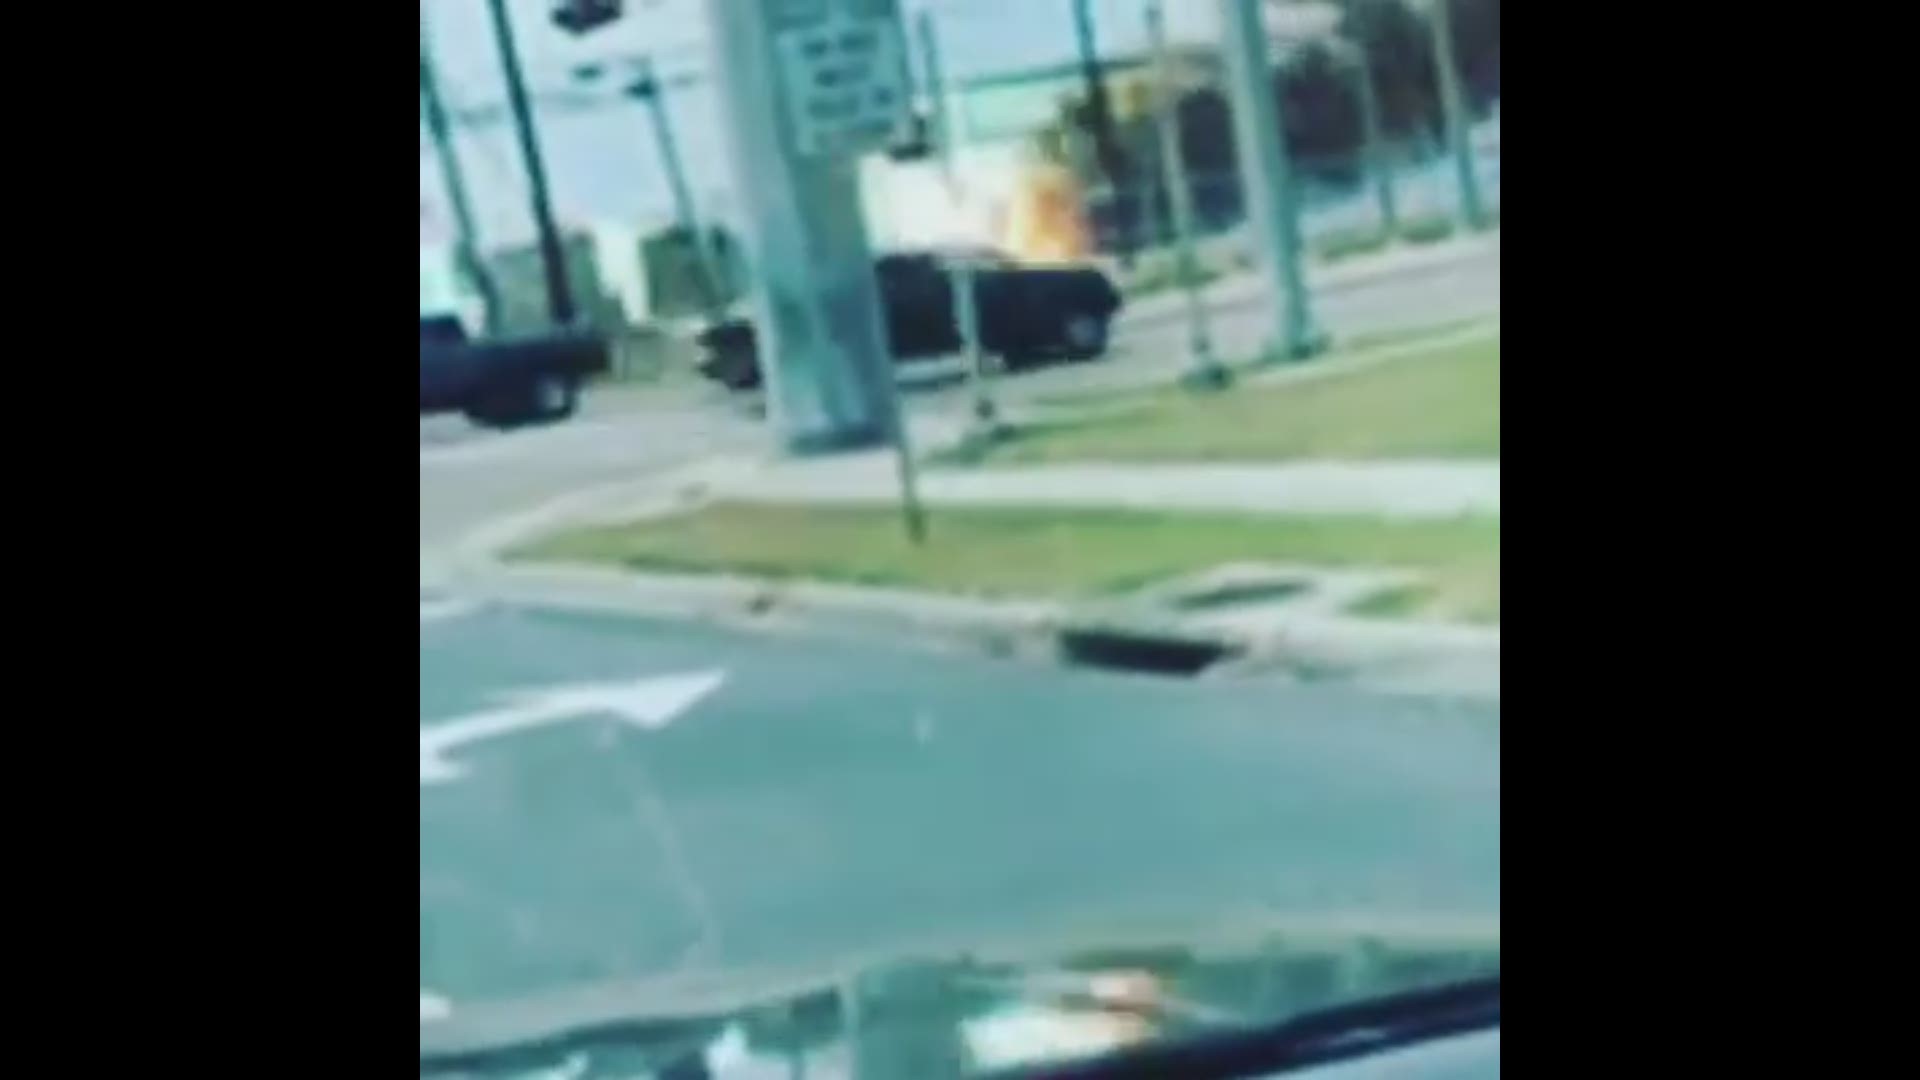 Christian Johnson from Turf Sports Complex in Corpus Christi's southside shot video of a fire at Yorktown and Cimarron Wednesday afternoon that led to an outage affecting over 14,000 customers.